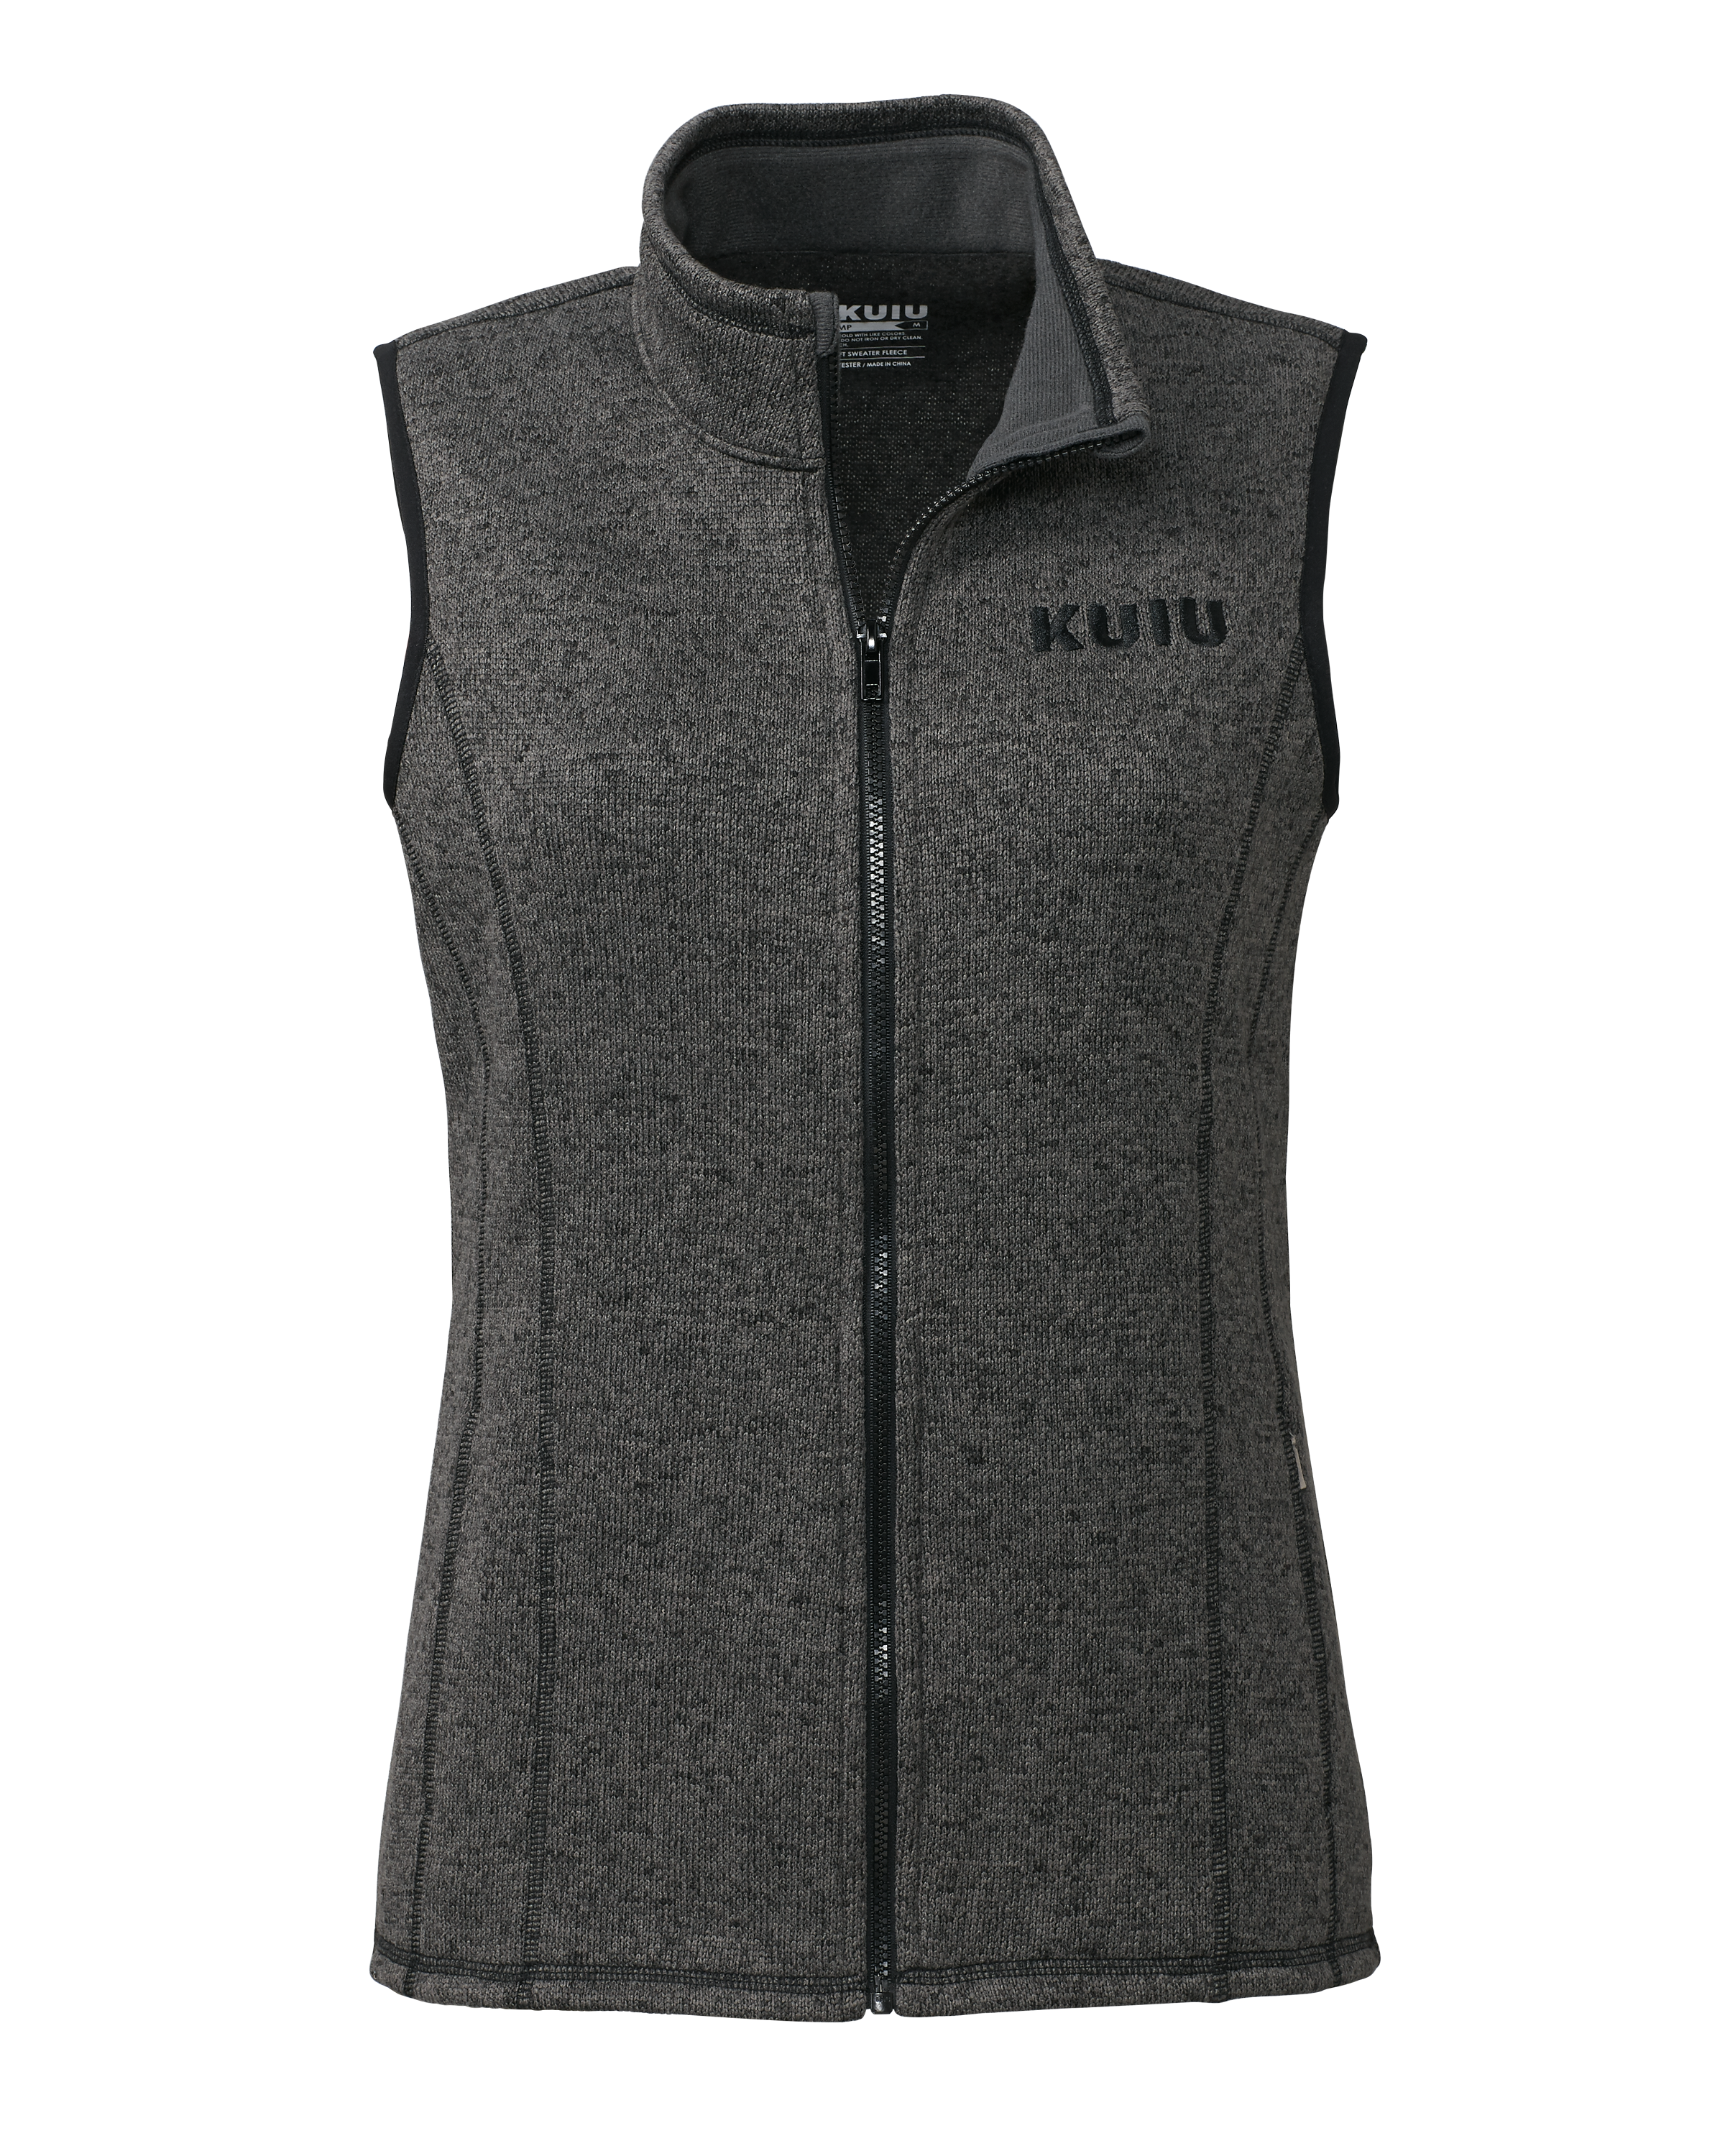 KUIU Women's Base Camp Sweater Vest in Charcoal | Size XL